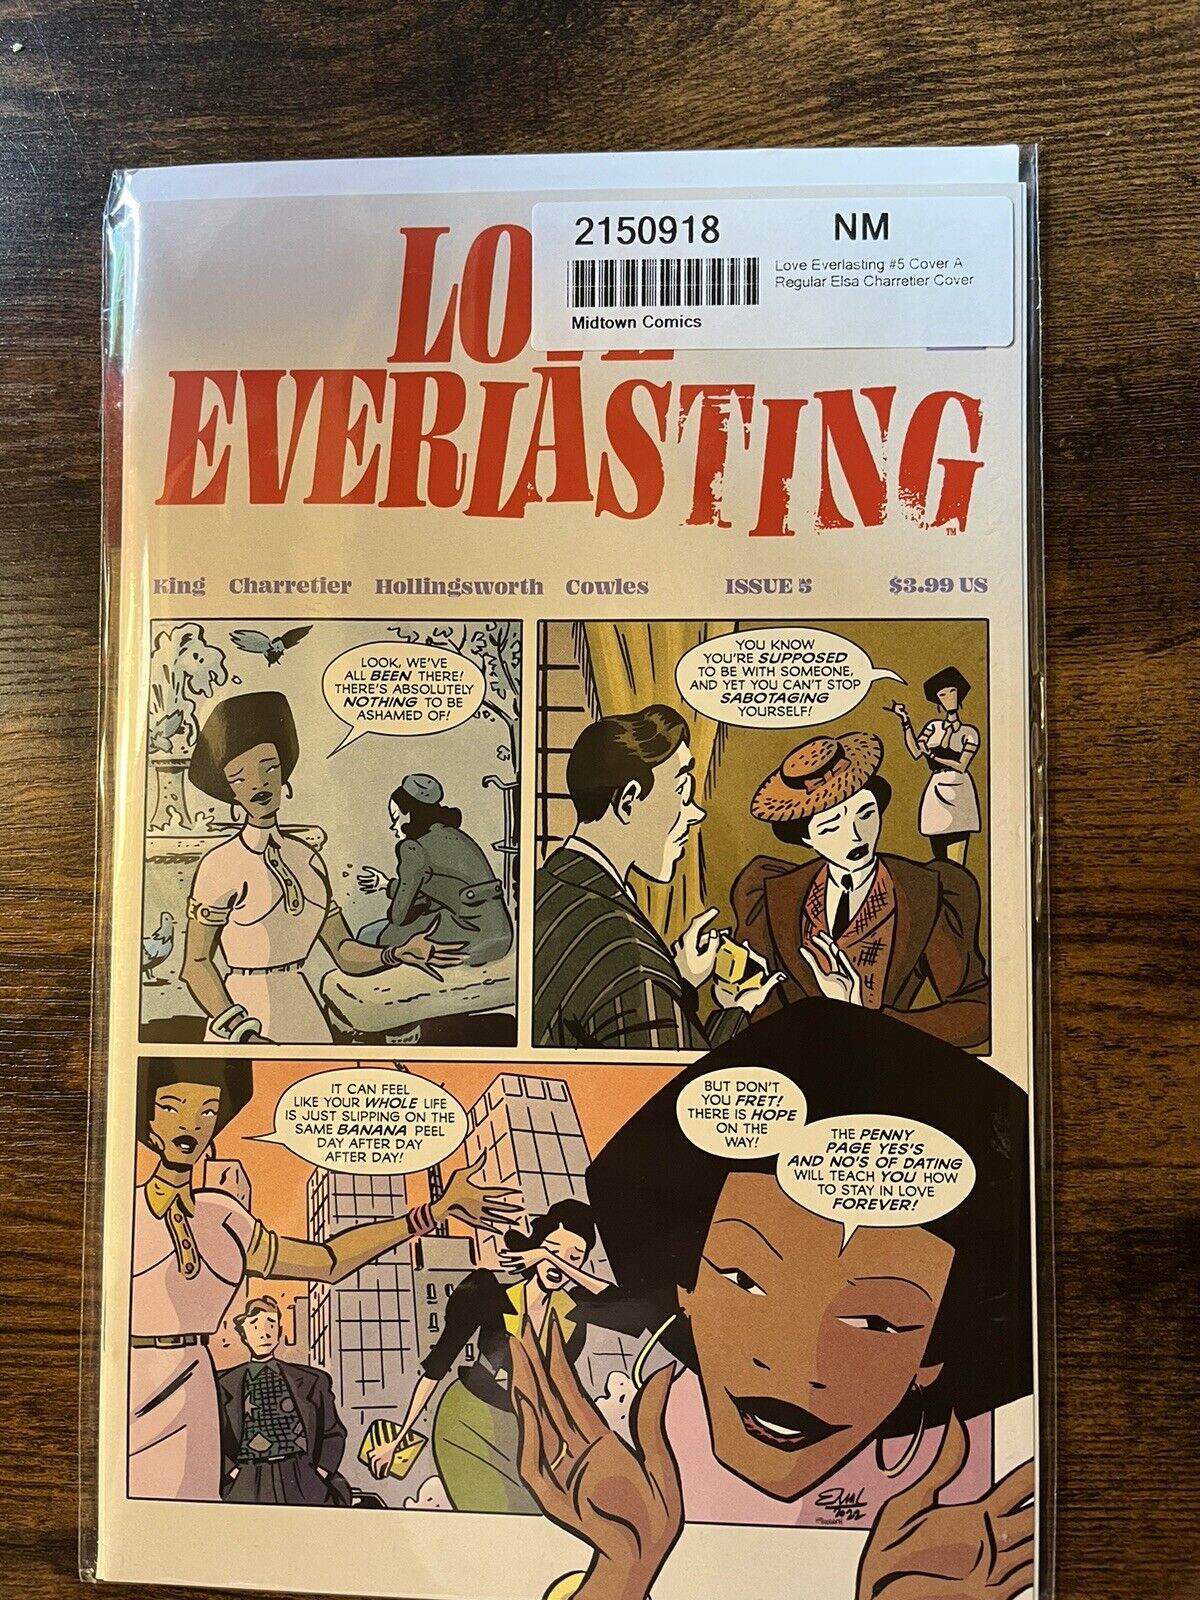 Love Everlasting 5 Cover A Comb. Shipping $4.99 1st Iss. $.50 Add\'l Iss.